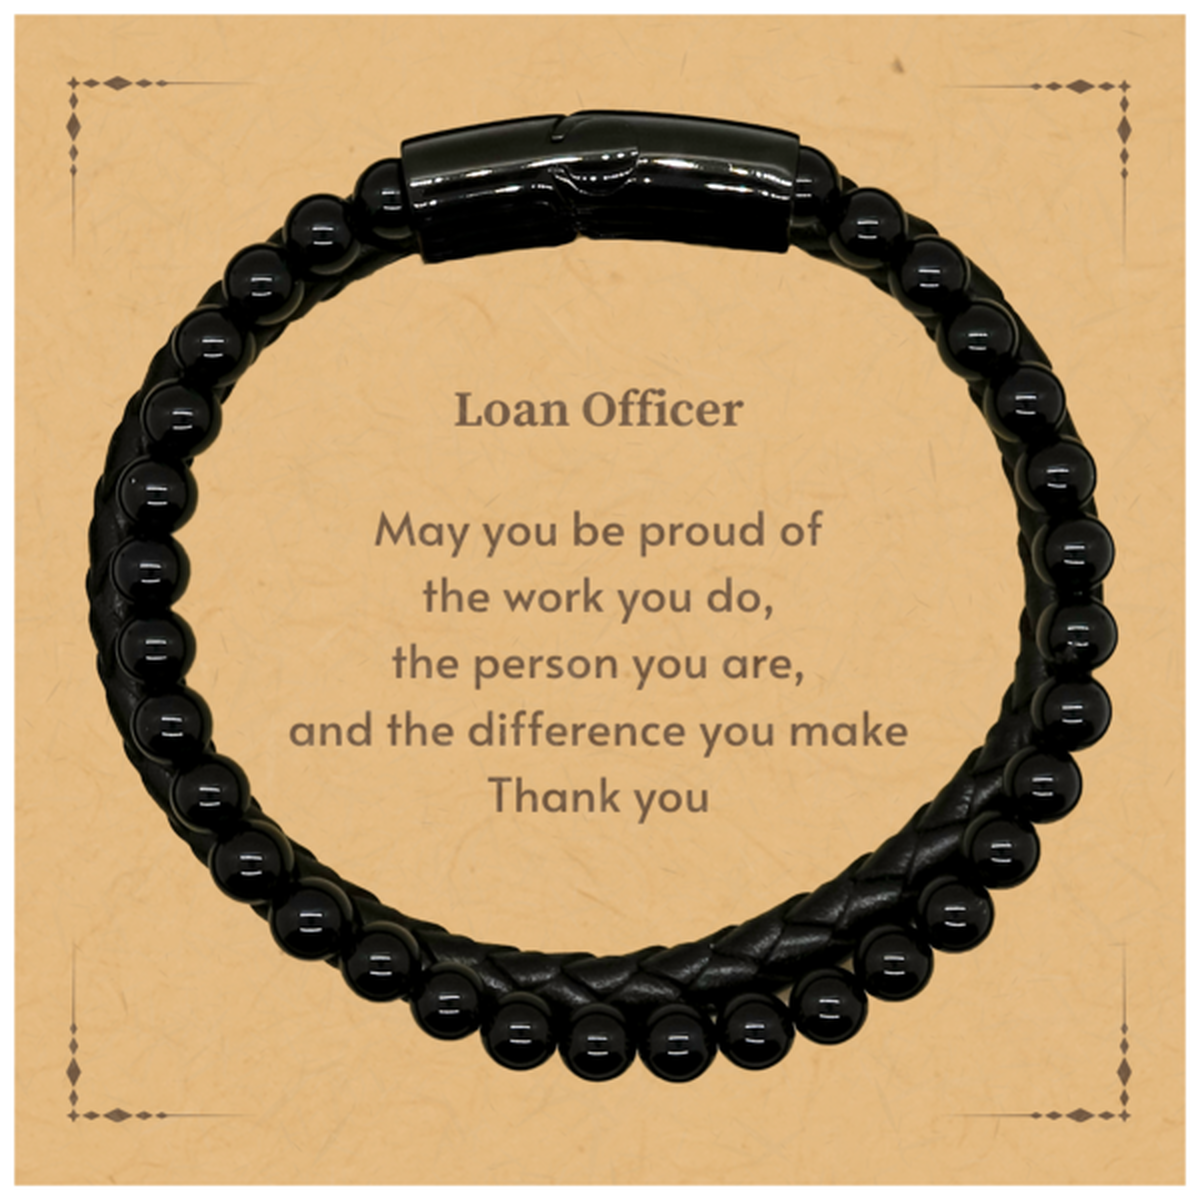 Heartwarming Stone Leather Bracelets Retirement Coworkers Gifts for Loan Officer, Loan Officer May You be proud of the work you do, the person you are Gifts for Boss Men Women Friends